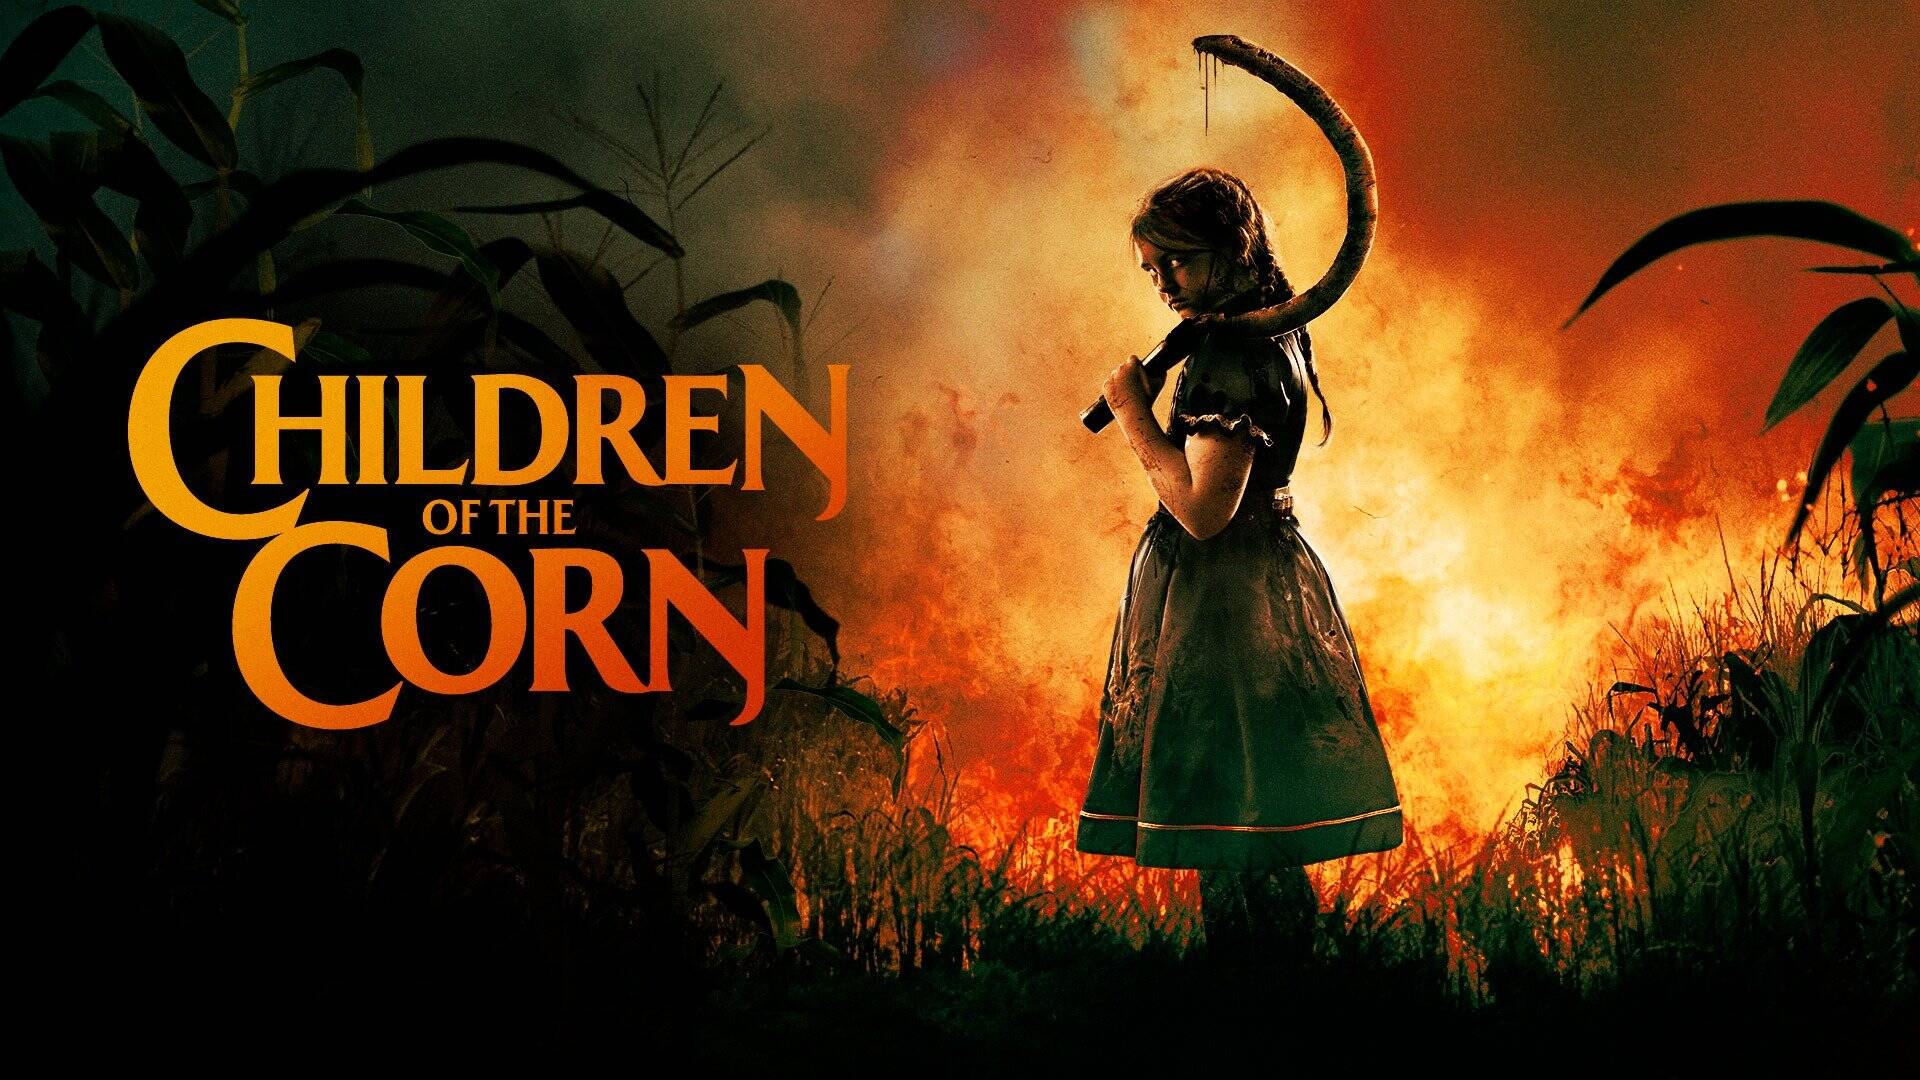 42-facts-about-the-movie-children-of-the-corn